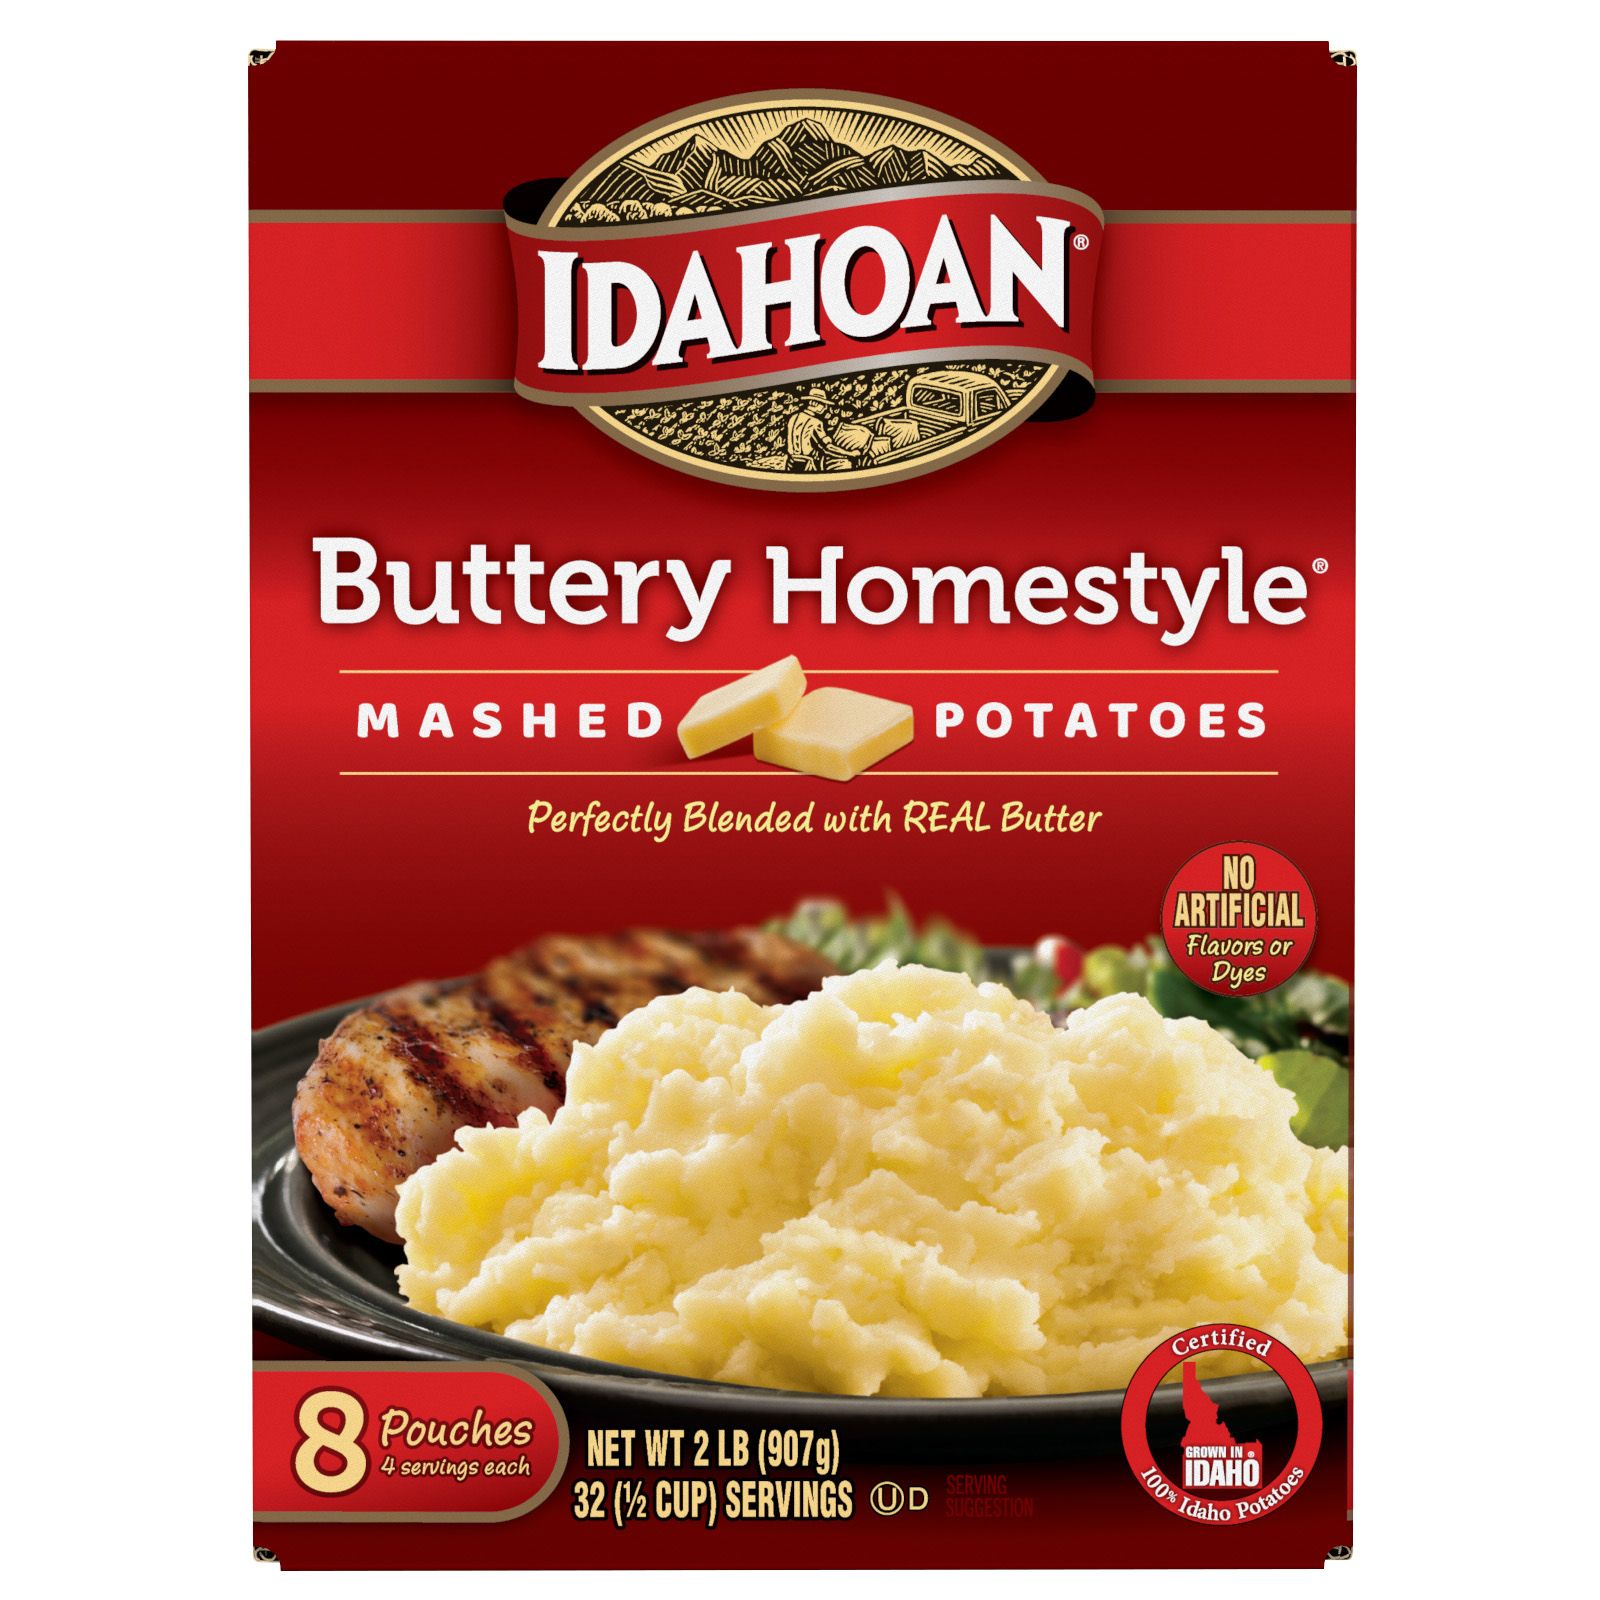 Idahoan Mashed Potatoes, Four Cheese, Family Size - 8 pack, 8 oz pouches